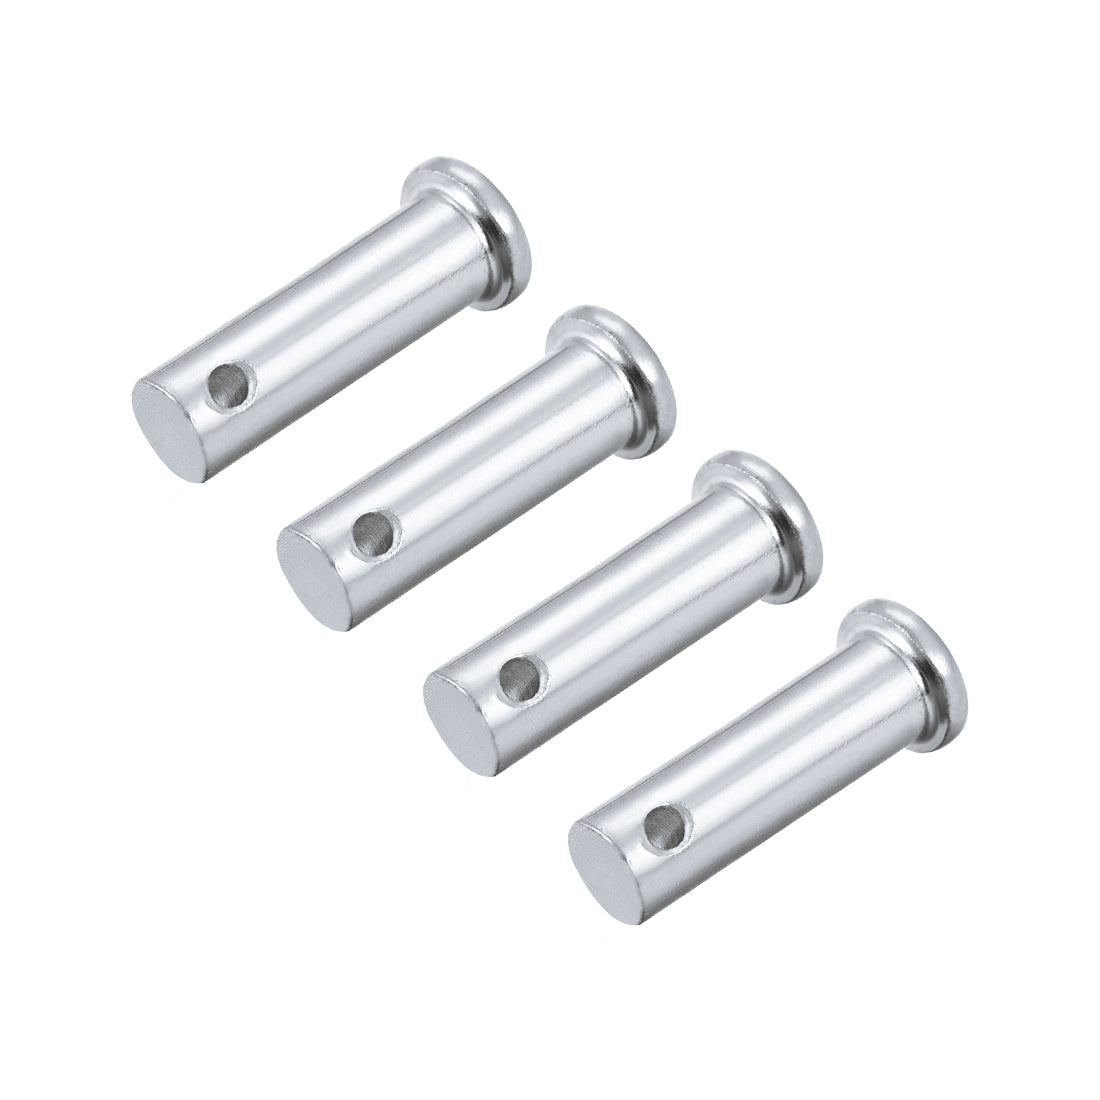 Uxcell Uxcell Single Hole Clevis Pins - 10mm X 75mm Flat Head Zinc-Plating Solid Steel Link Hinge Pin 4Pcs